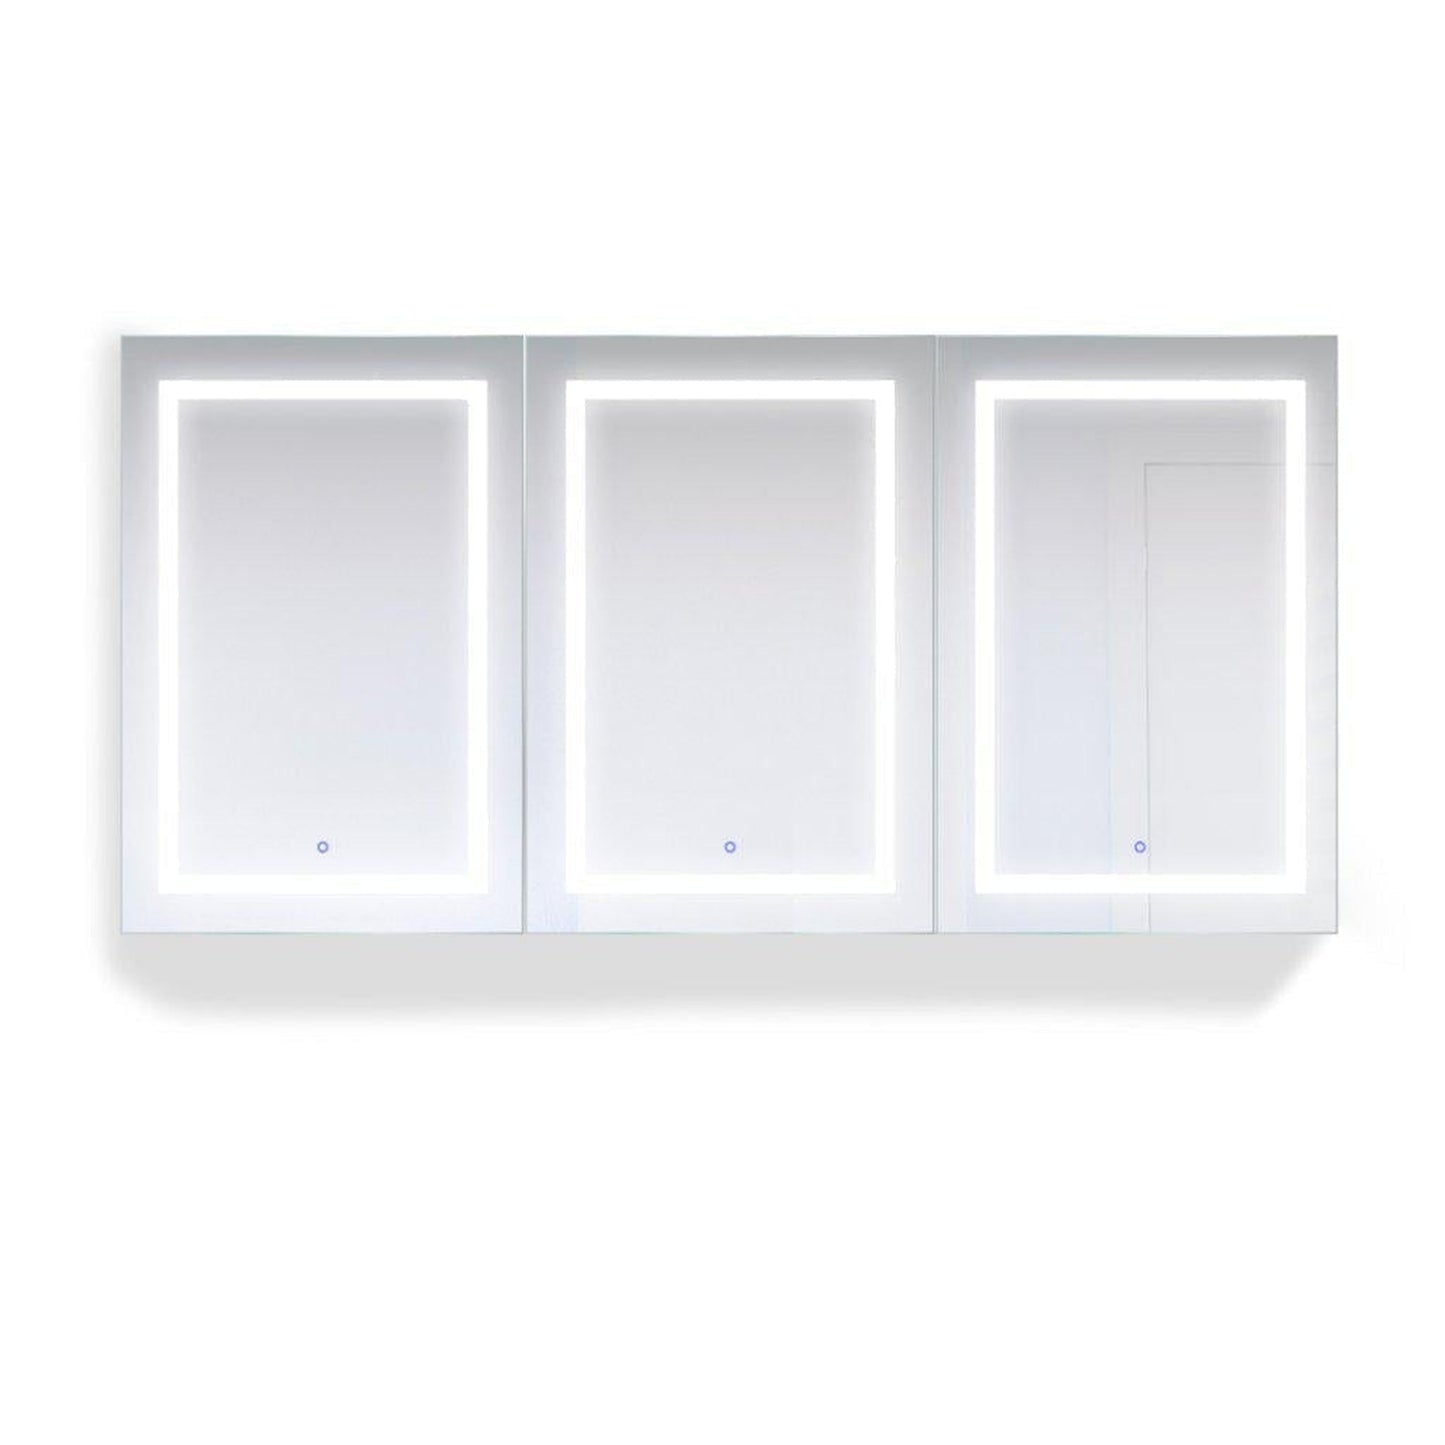 Krugg Reflections Svange 72" x 36" 5000K Tri-View Left-Right-Right Opening Recessed/Surface-Mount Illuminated Silver Backed LED Medicine Cabinet Mirror With Built-in Defogger, Dimmer and Electrical Outlet